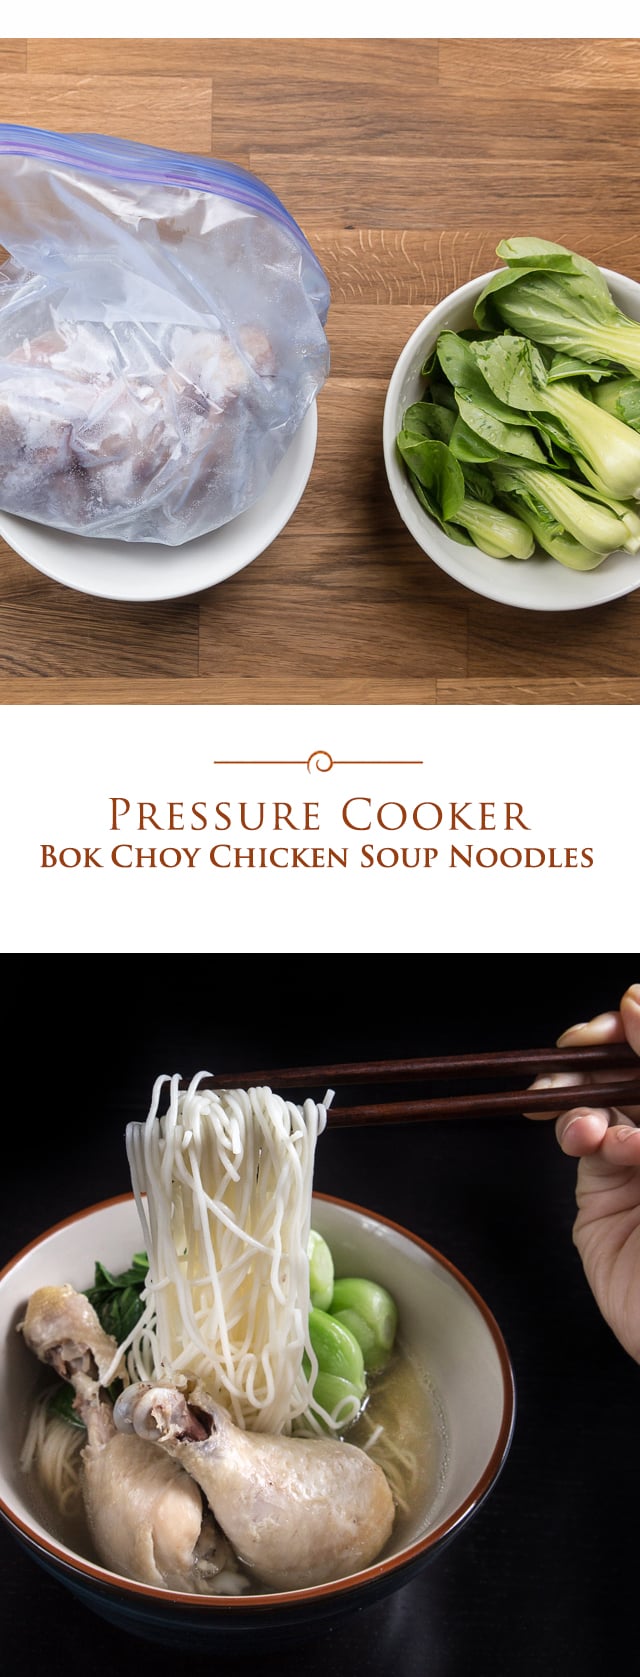 Bok choy chicken soup noodles is a comfort food meal made in an Instant Pot. Make this easy and quick pressure cooker Asian chicken noodle soup recipe in 30 minutes with minimal preparation! This homey bowl of Pressure Cooker Bok Choy Chicken Soup Noodles is so comforting to eat.  via @PressureCook2da